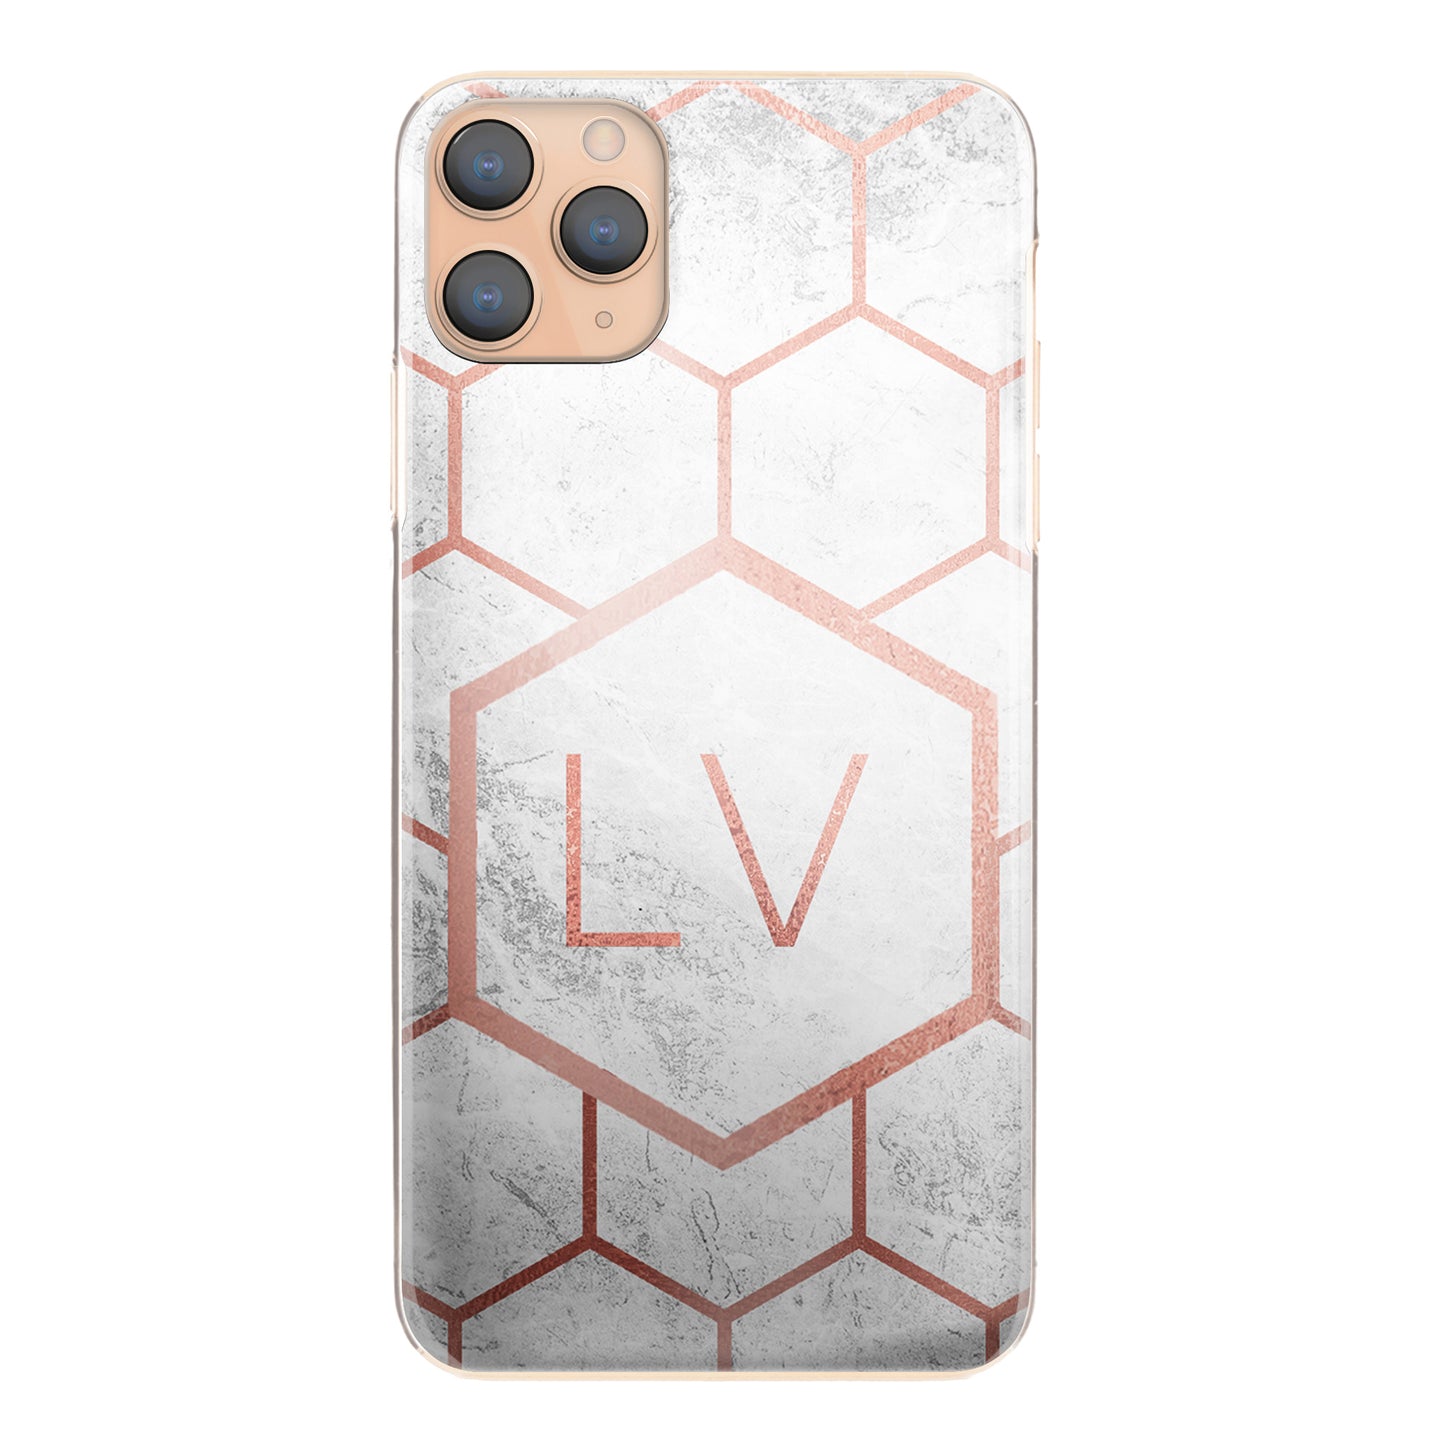 Personalised Sony Phone Hard Case with Pink Initials and Honeycomb Pattern on Grey Marble